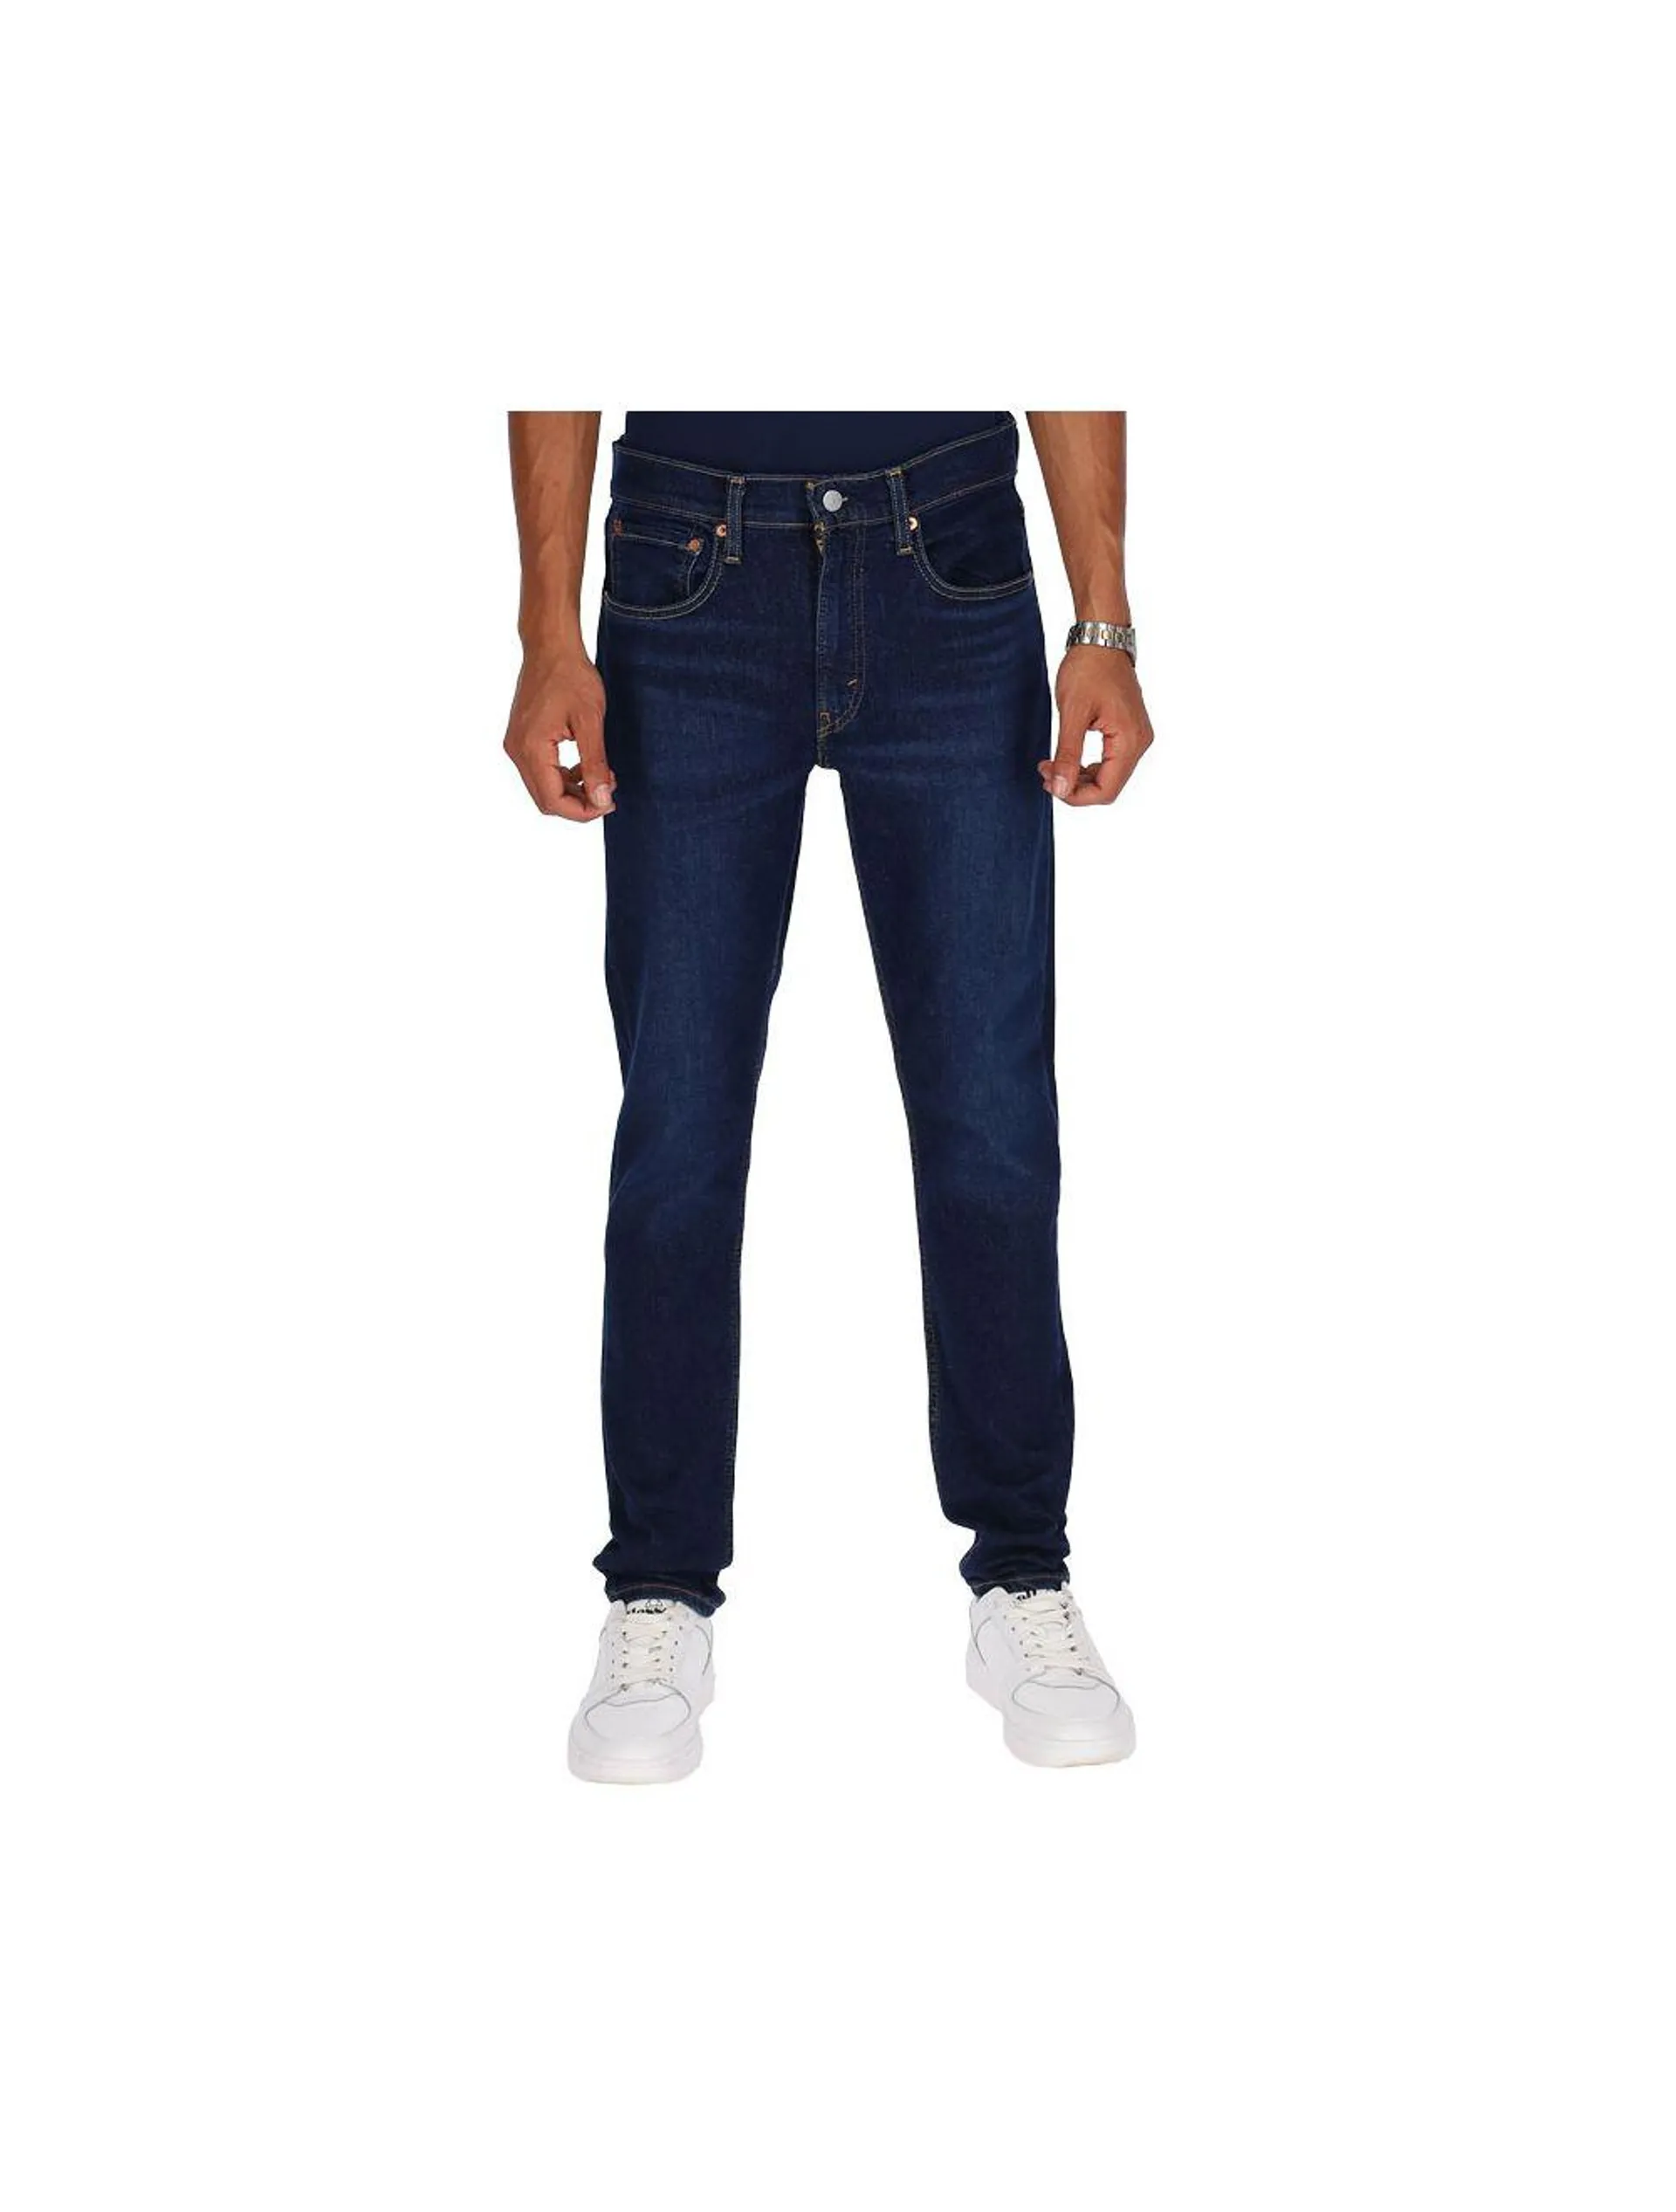 Levis Skinny Tapered Fit Mens Jeans